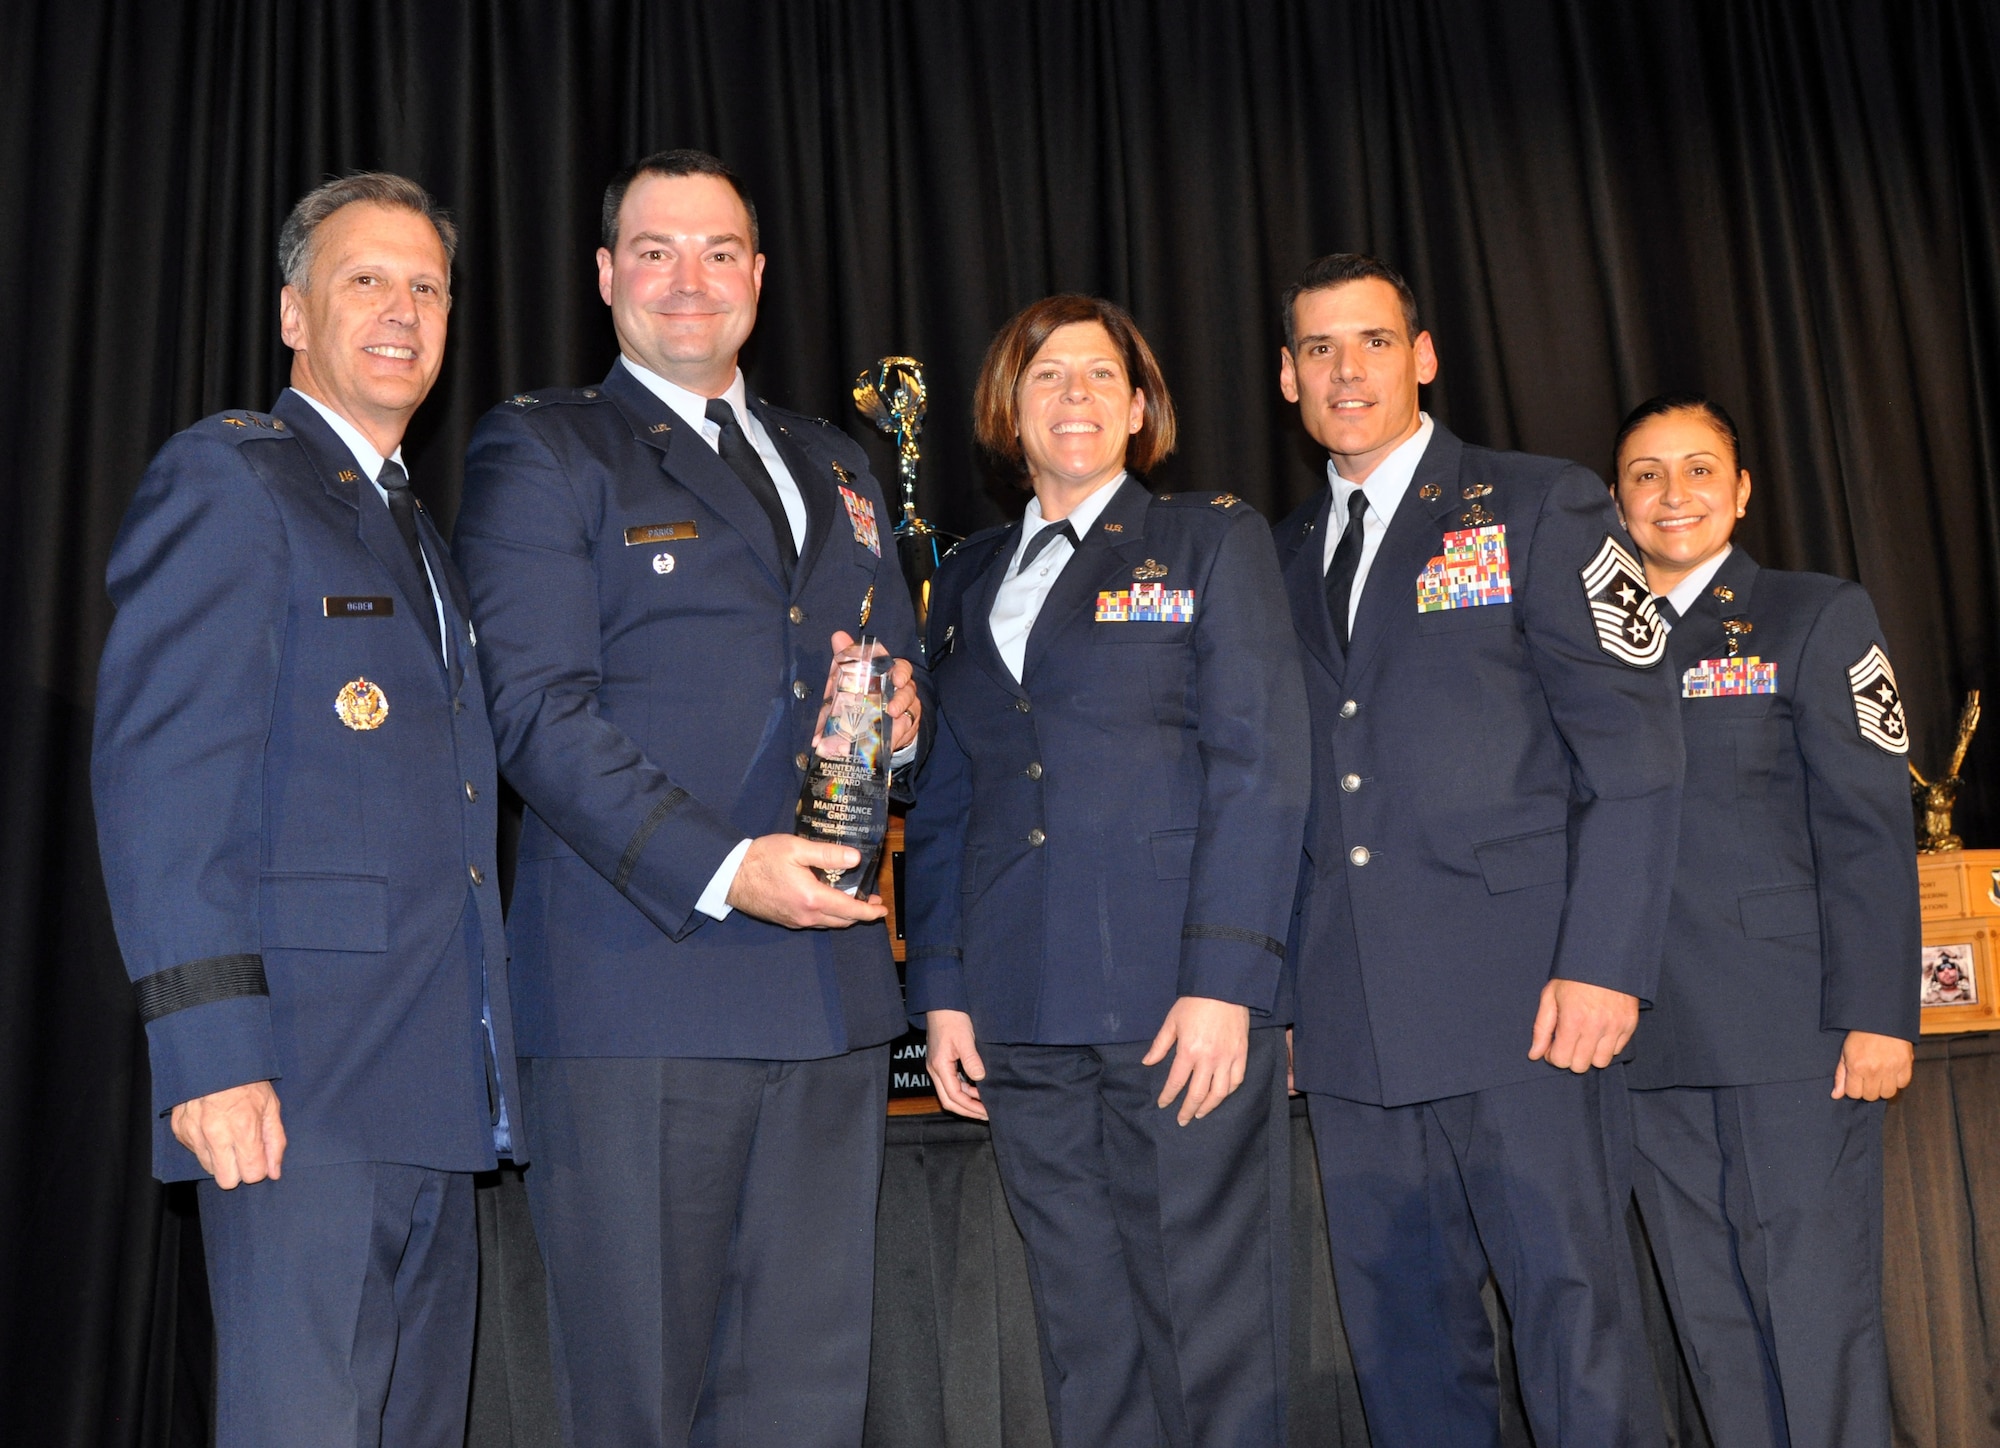 The 916th Maintenance Group is presented the Chief Master Sergeant James K. Clouse Trophy for Maintenance Excellence during the 20th Annual Raincross Awards dinner Nov. 19, 2019 at the Riverside Convention Center, Riverside, California. (U.S. Air Force photo by Candy Knight)